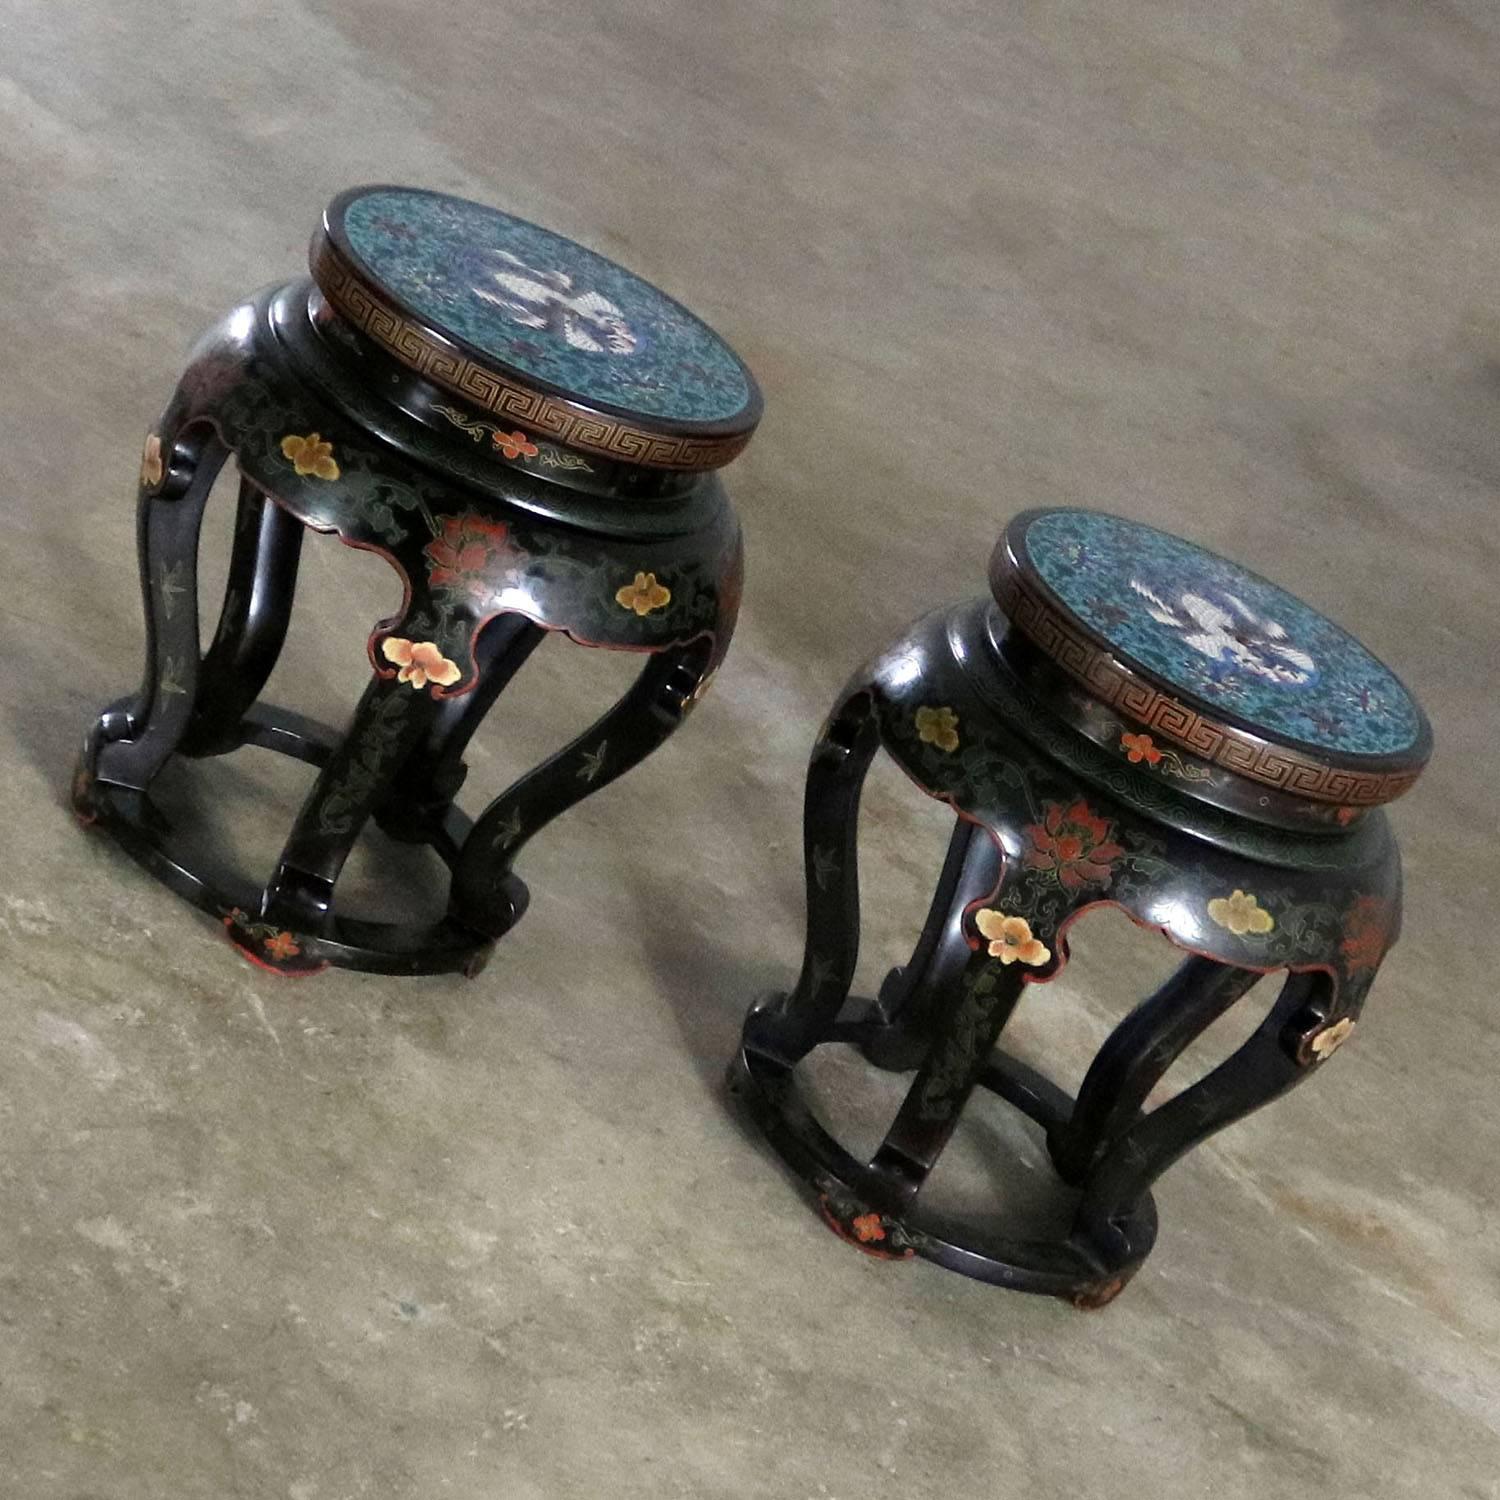 A superb pair of Chinese black lacquered stools or side tables with gorgeous cloisonné tops. They are in fabulous vintage condition. We believe them to be, circa 20th century and most likely 1920-1960.

This set of two Chinese drum style Chinoiserie